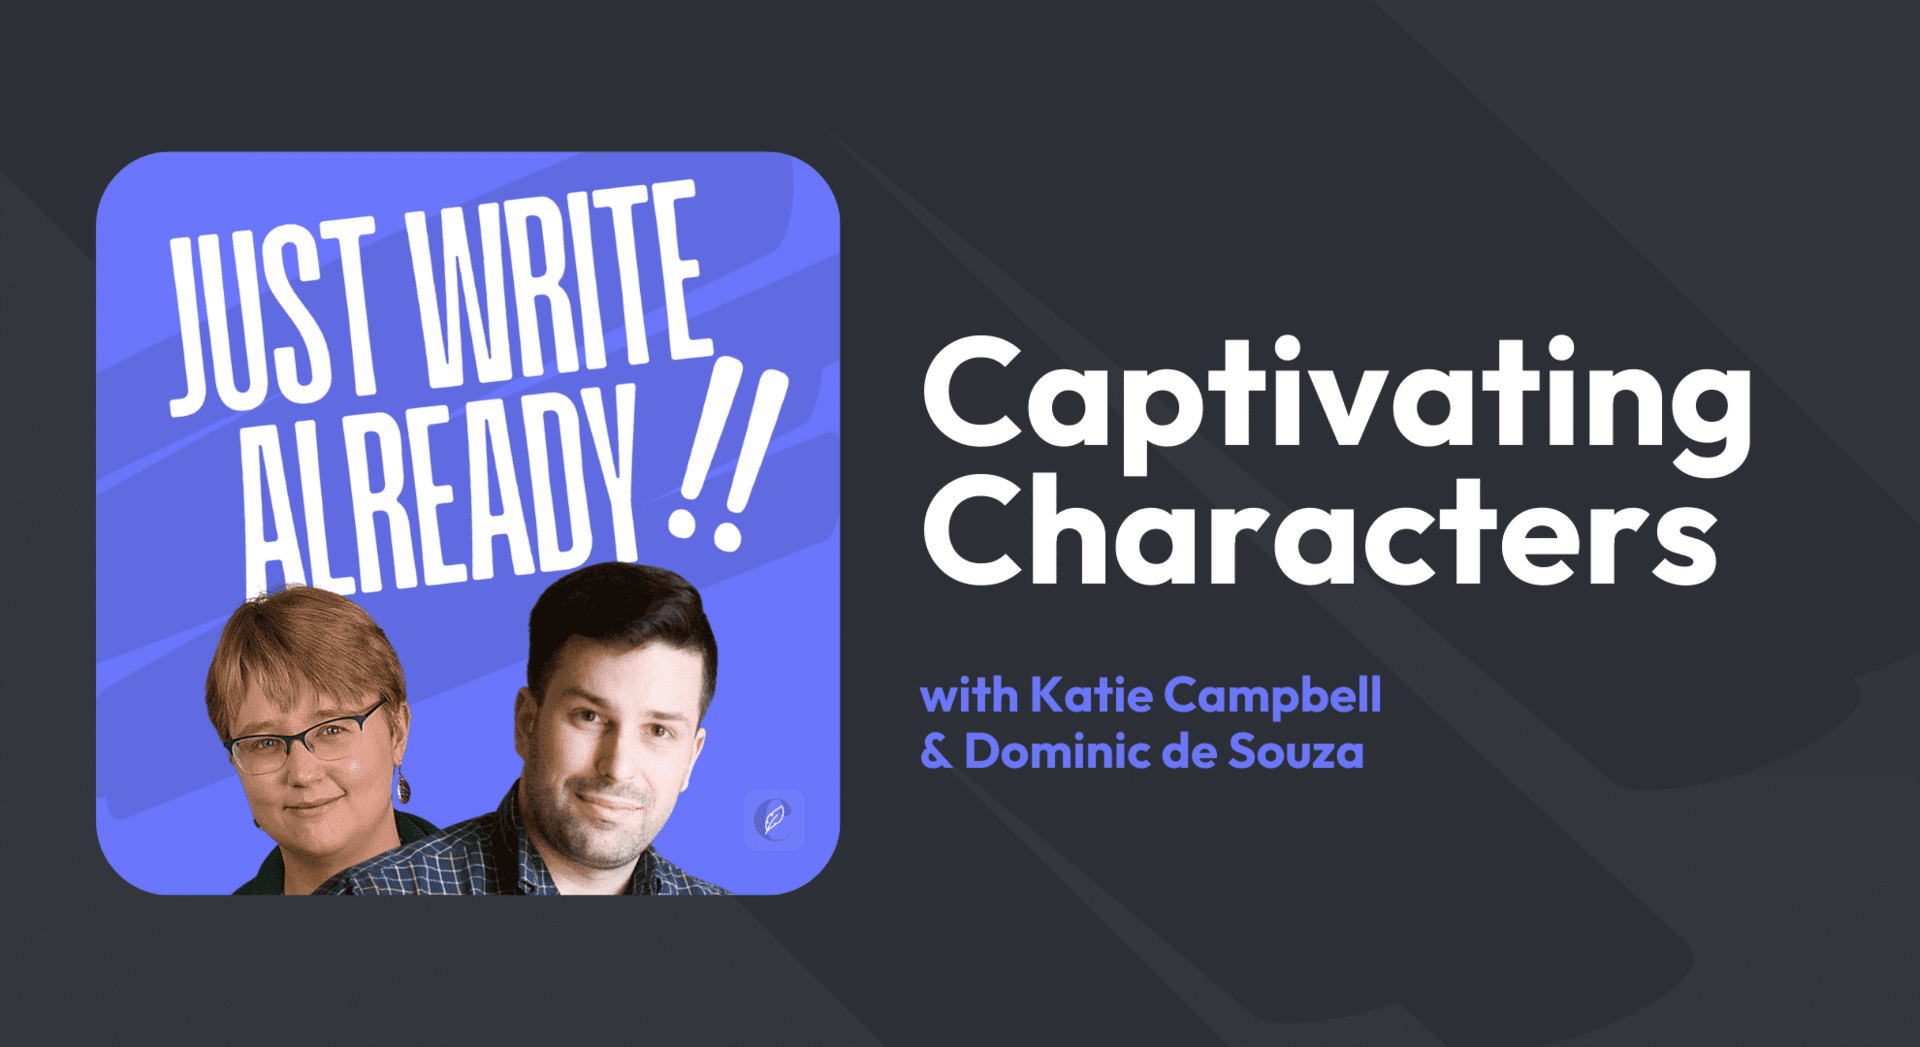 5 Easy Tips for Creating Captivating Characters